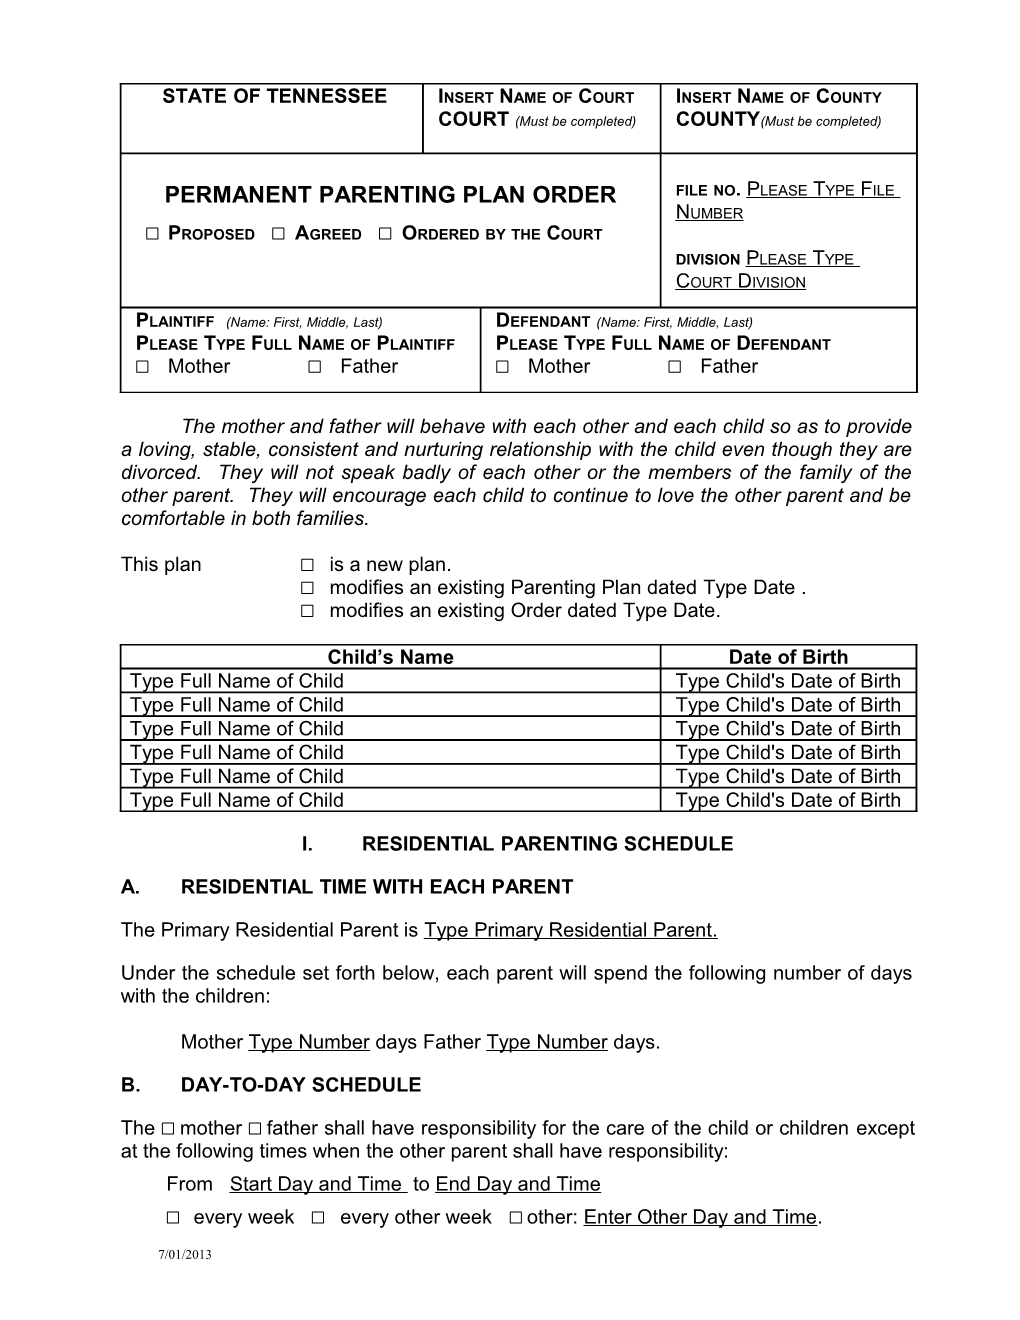 Modifies an Existing Parenting Plan Dated Type Date